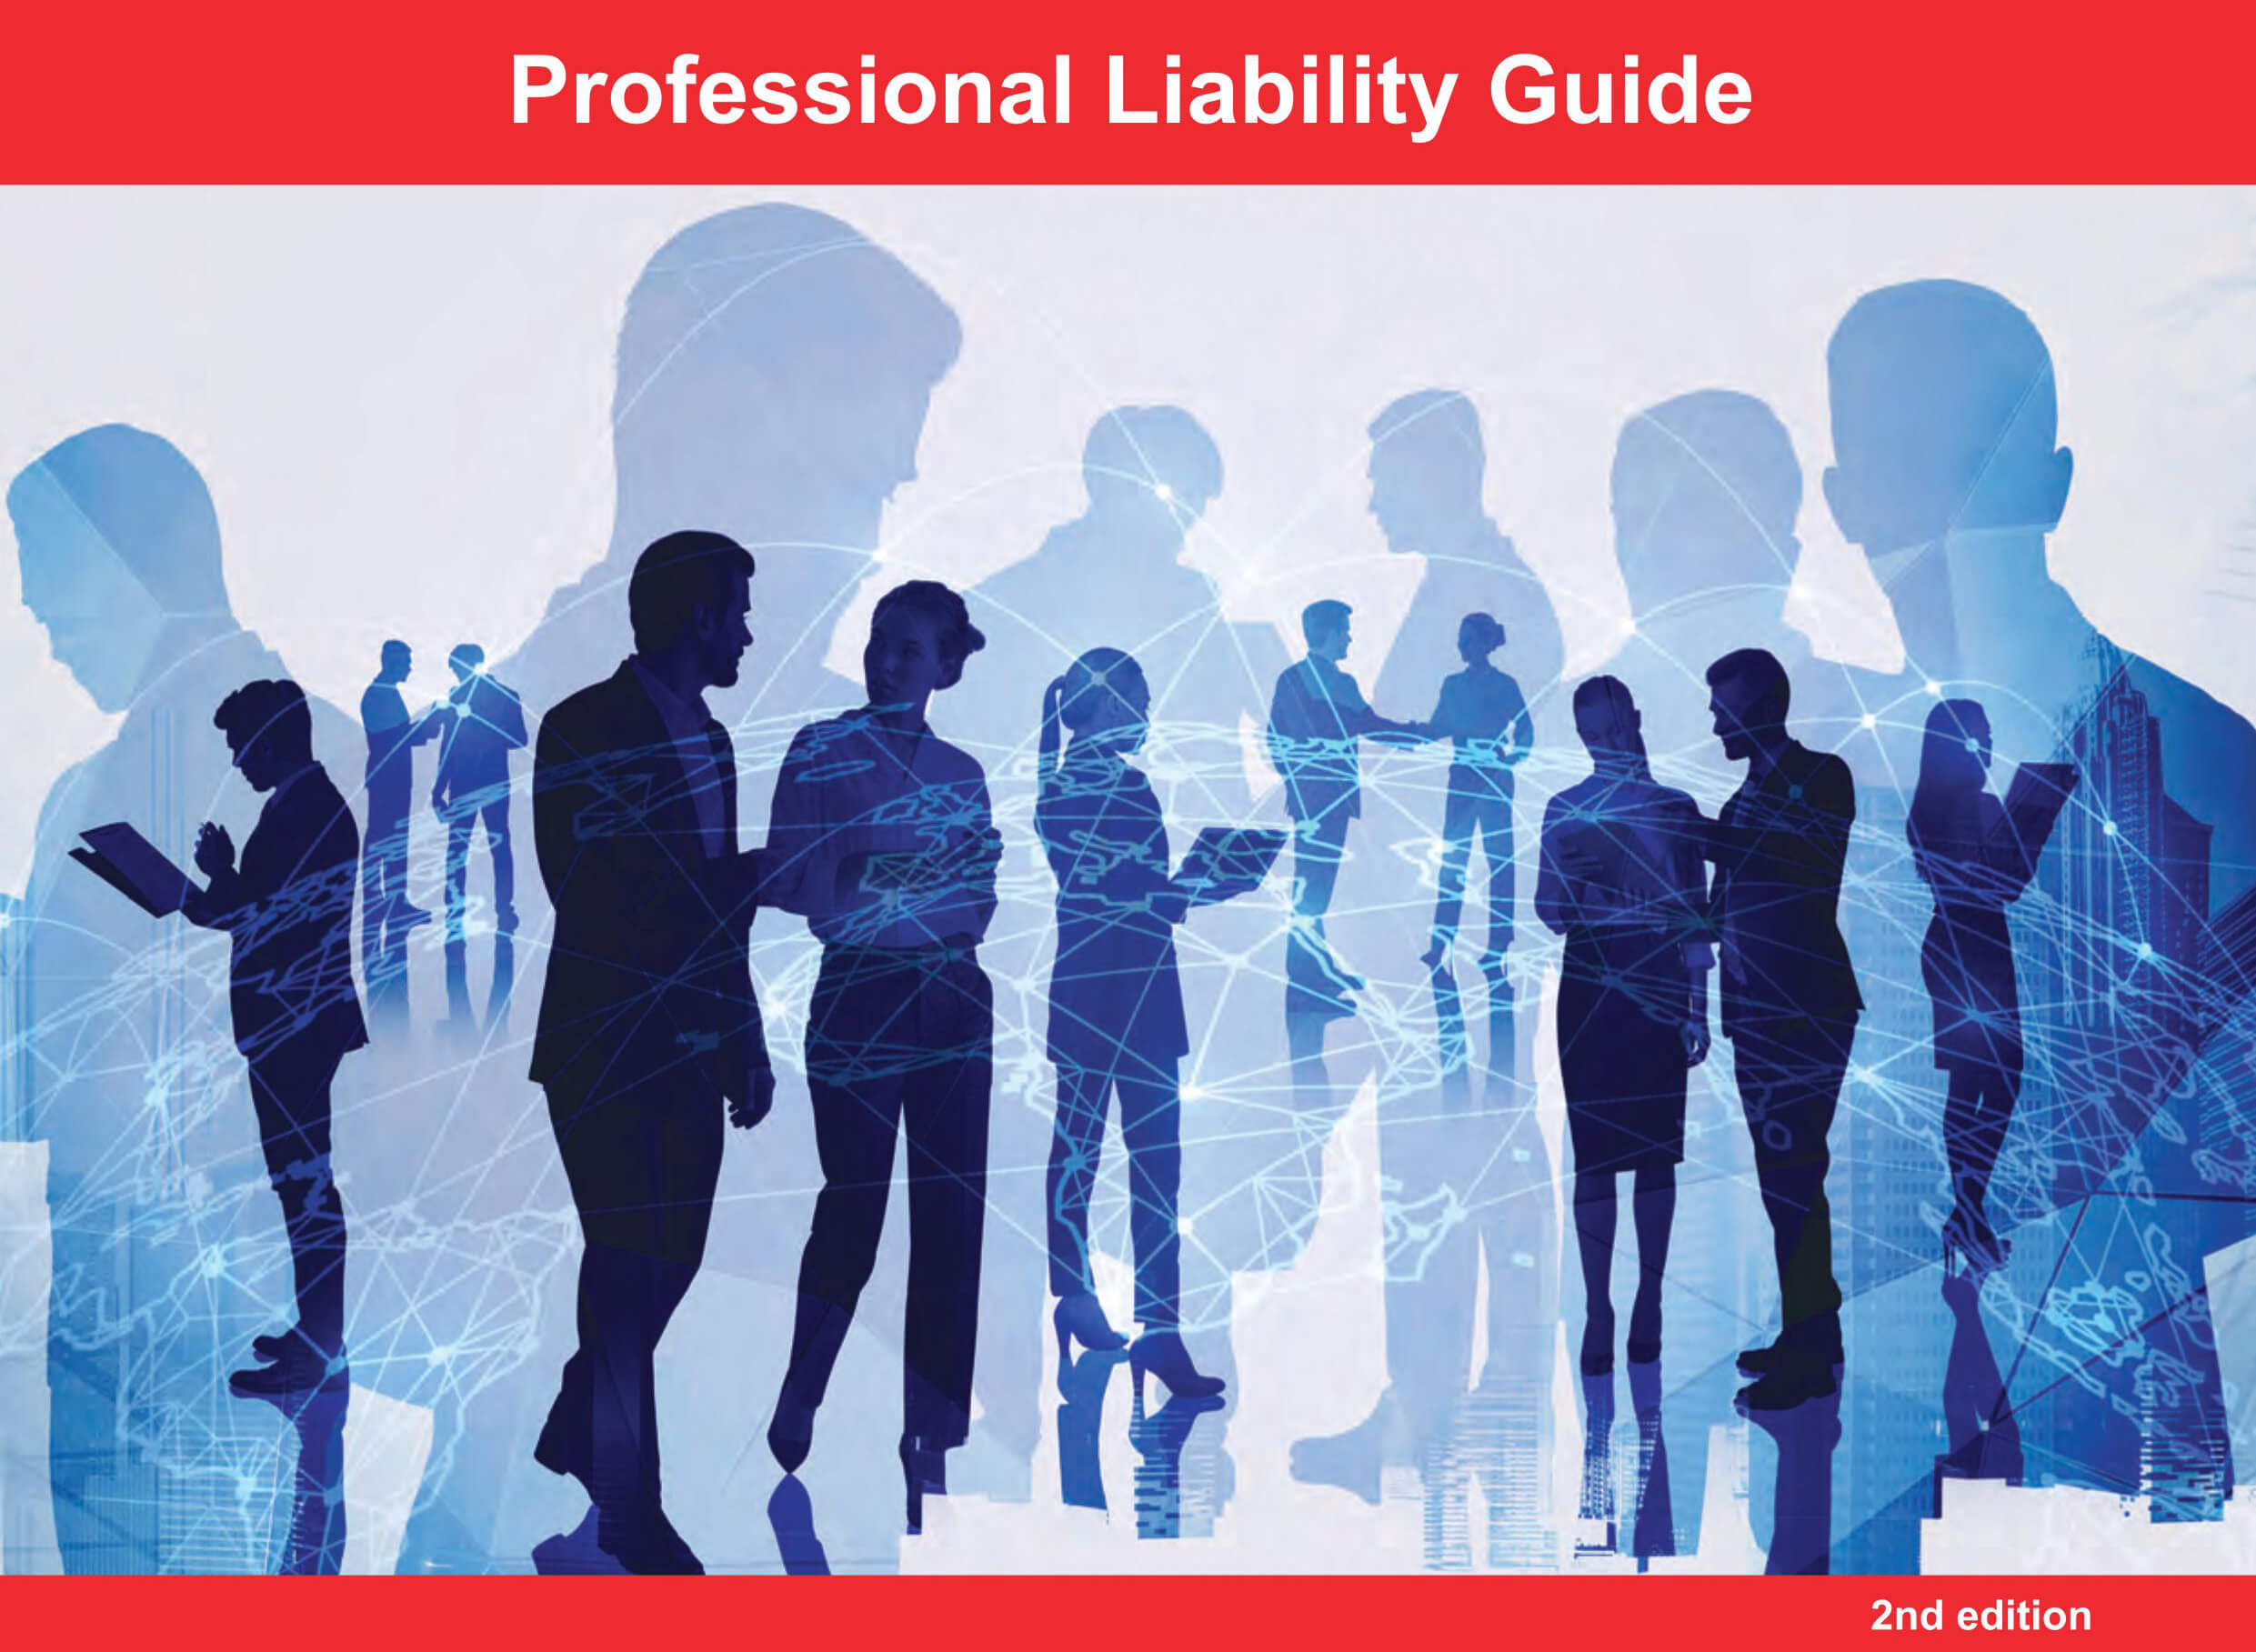 Professional Liability Guide (2nd edition)